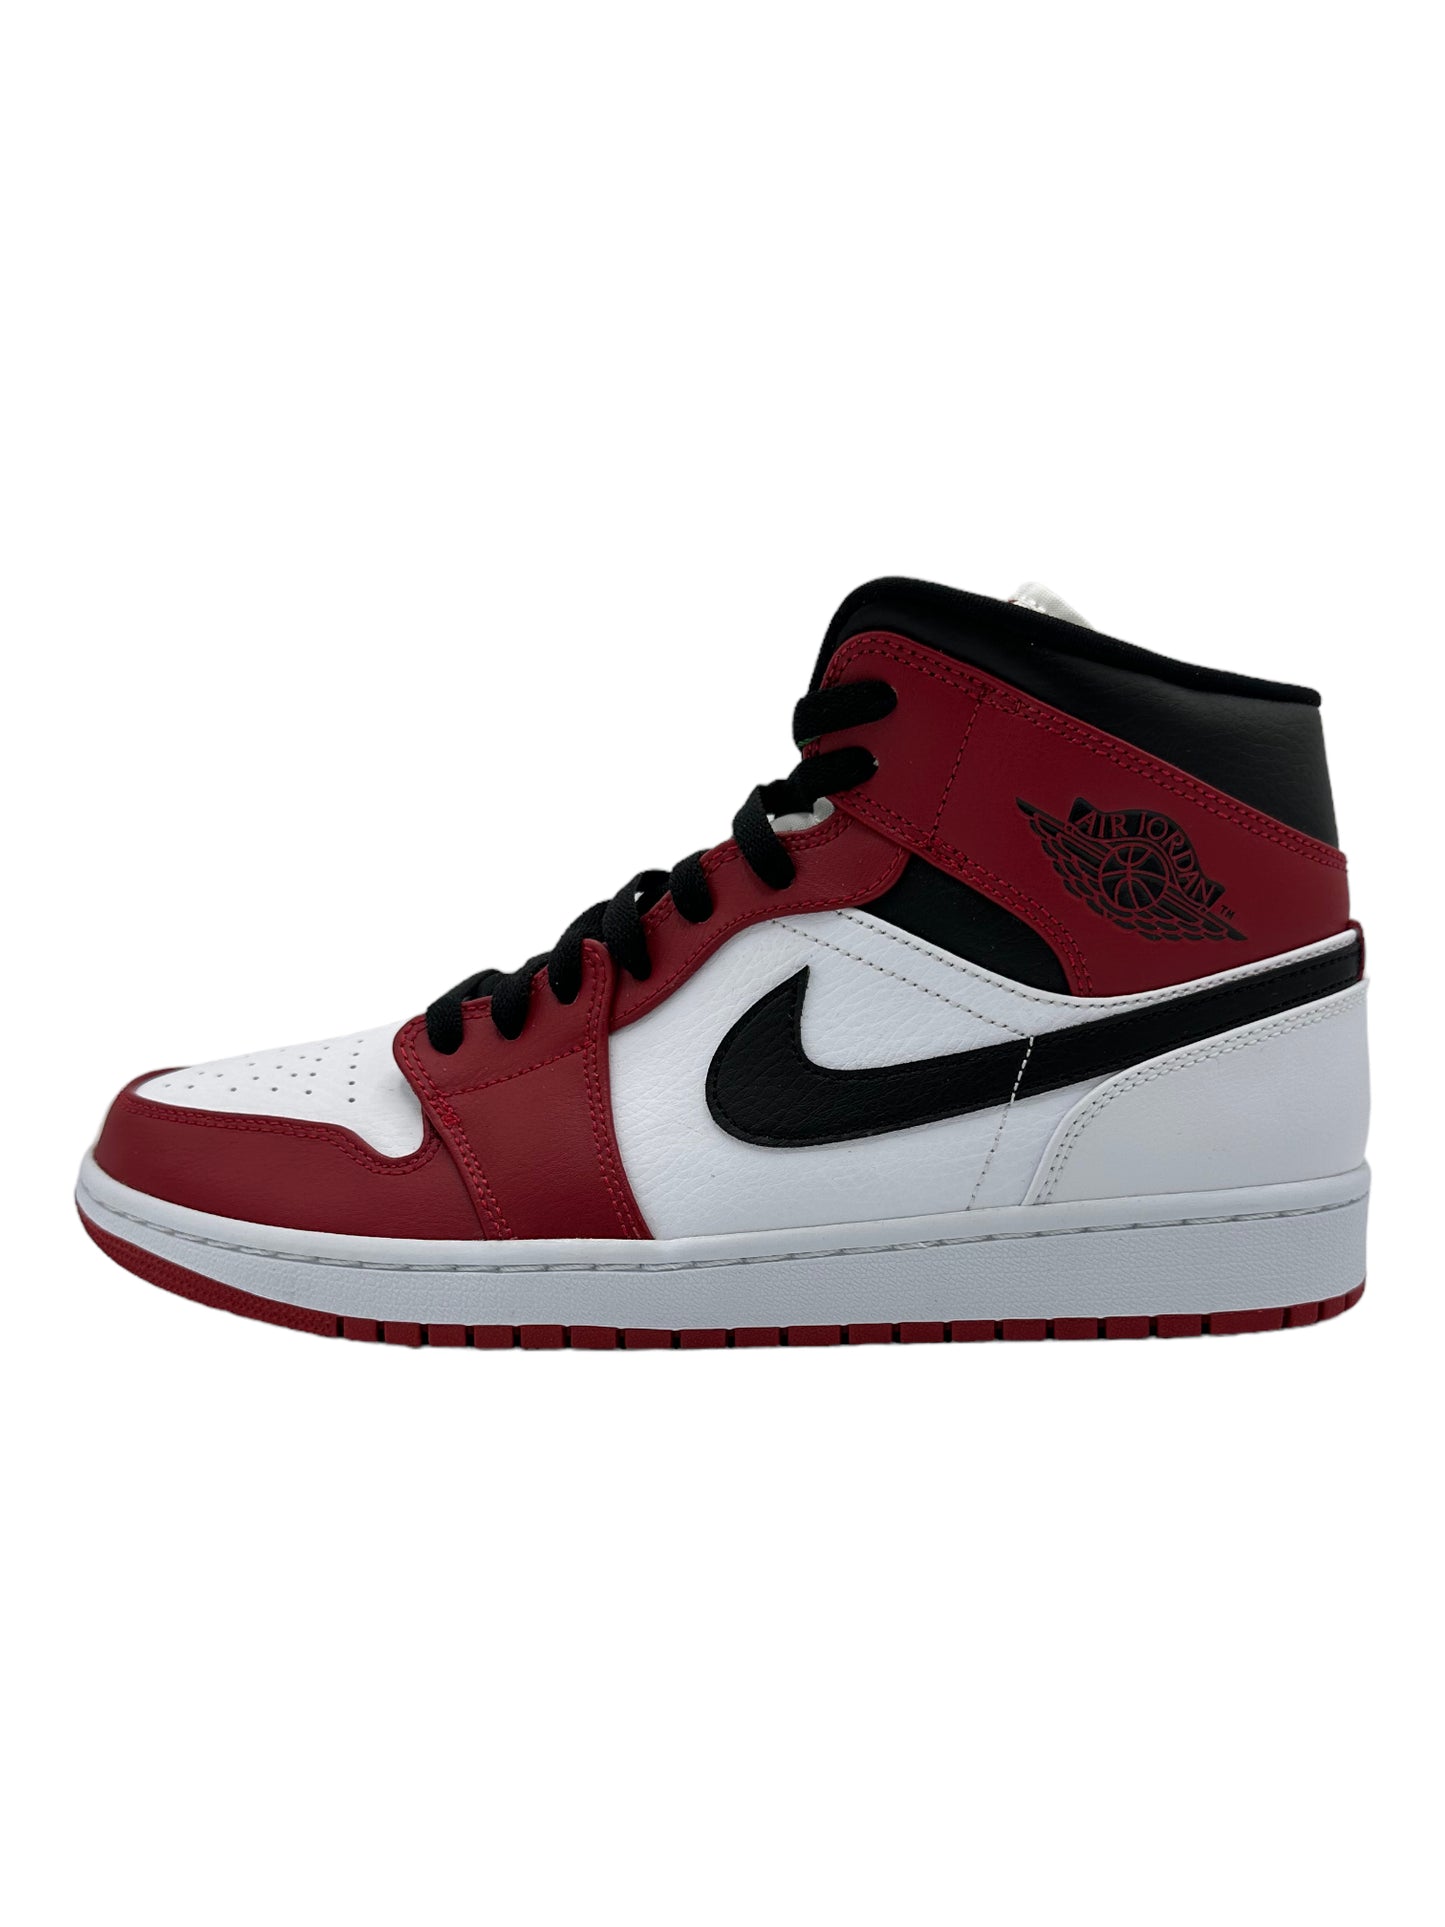 Nike Air Jordan 1 Mid Chicago White Heel Sneakers - Genuine Design Luxury Consignment for Men. New & Pre-Owned Clothing, Shoes, & Accessories. Calgary, Canada